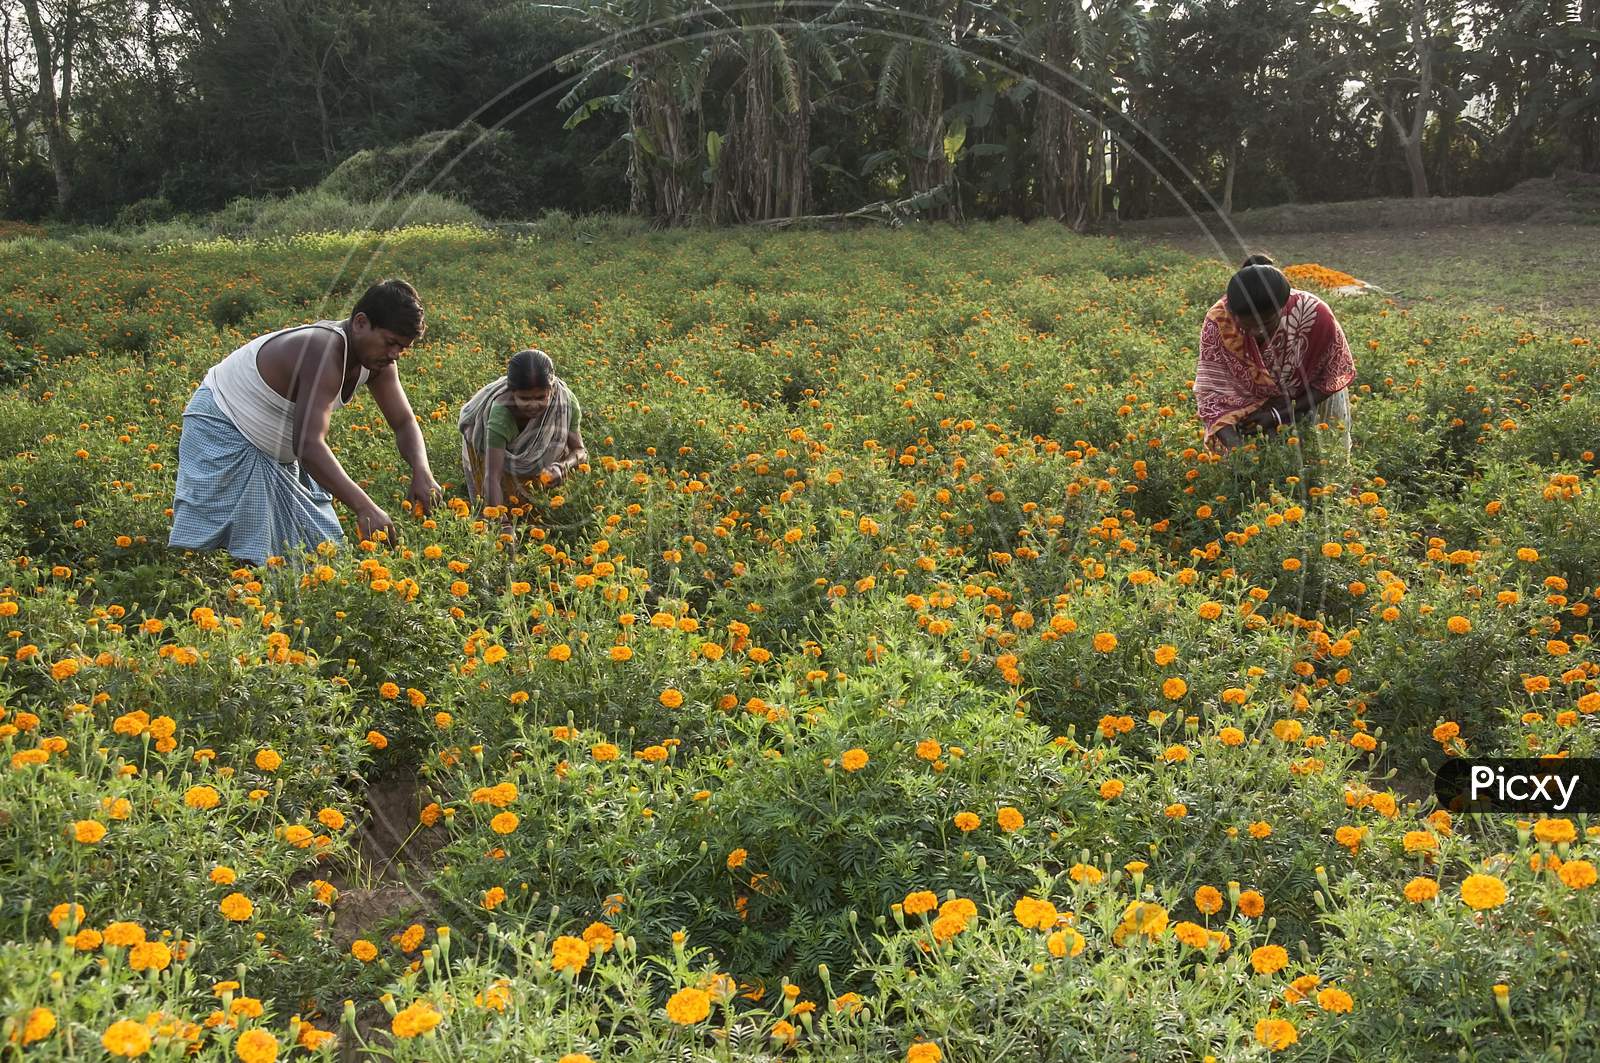 The growers of the marigold flowers are picking up flowers.